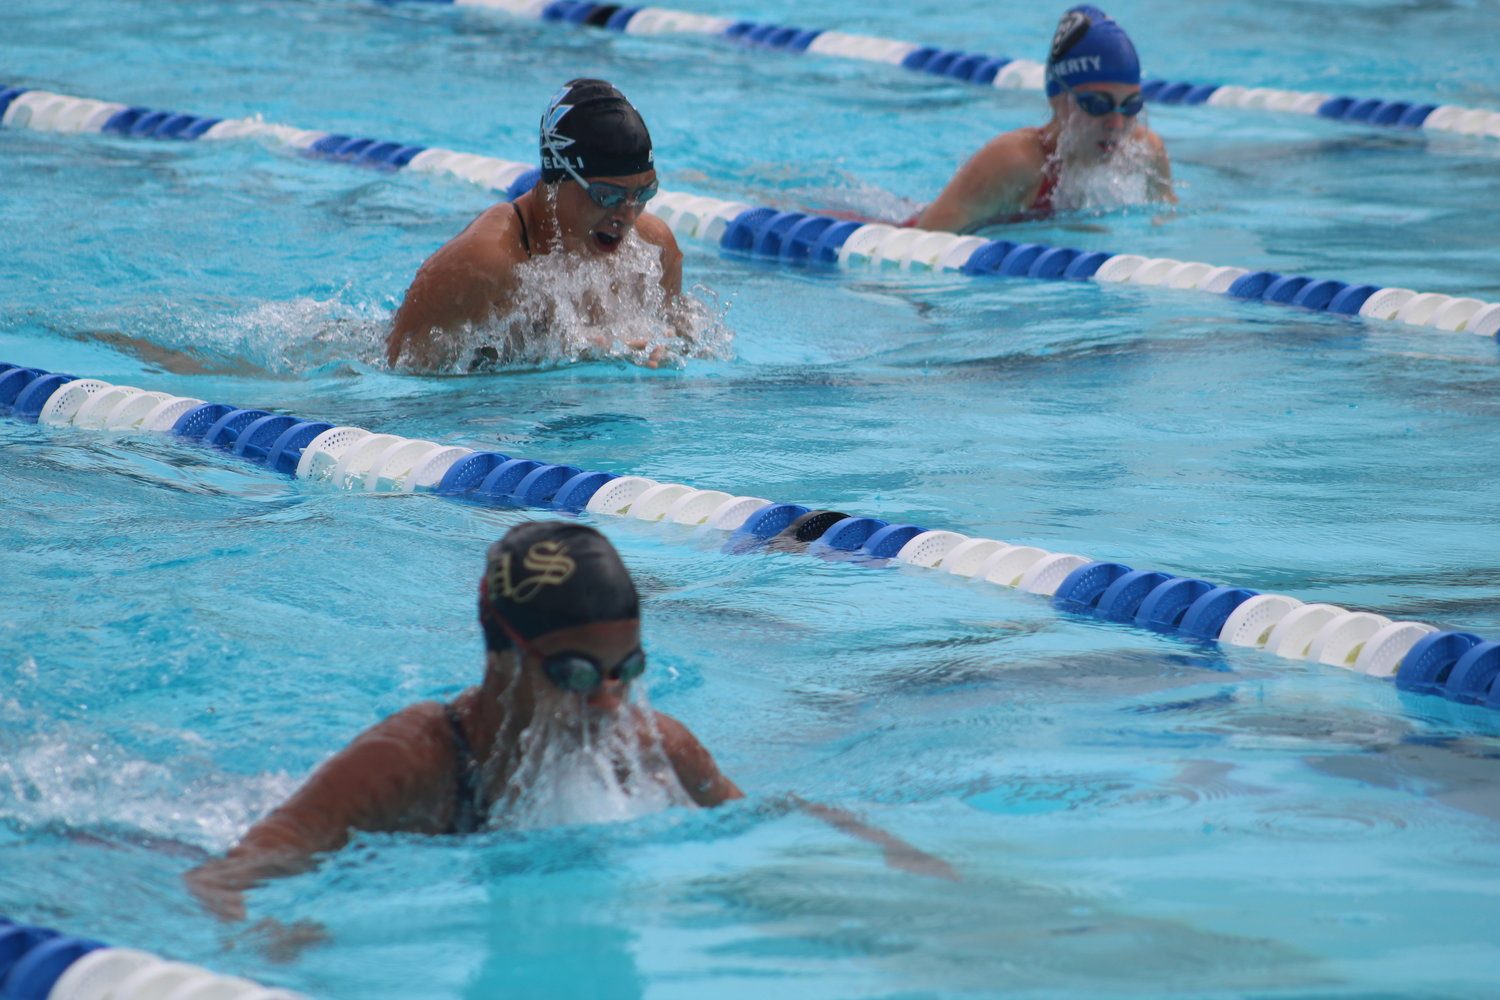 The event included preliminary races prior to the finals.